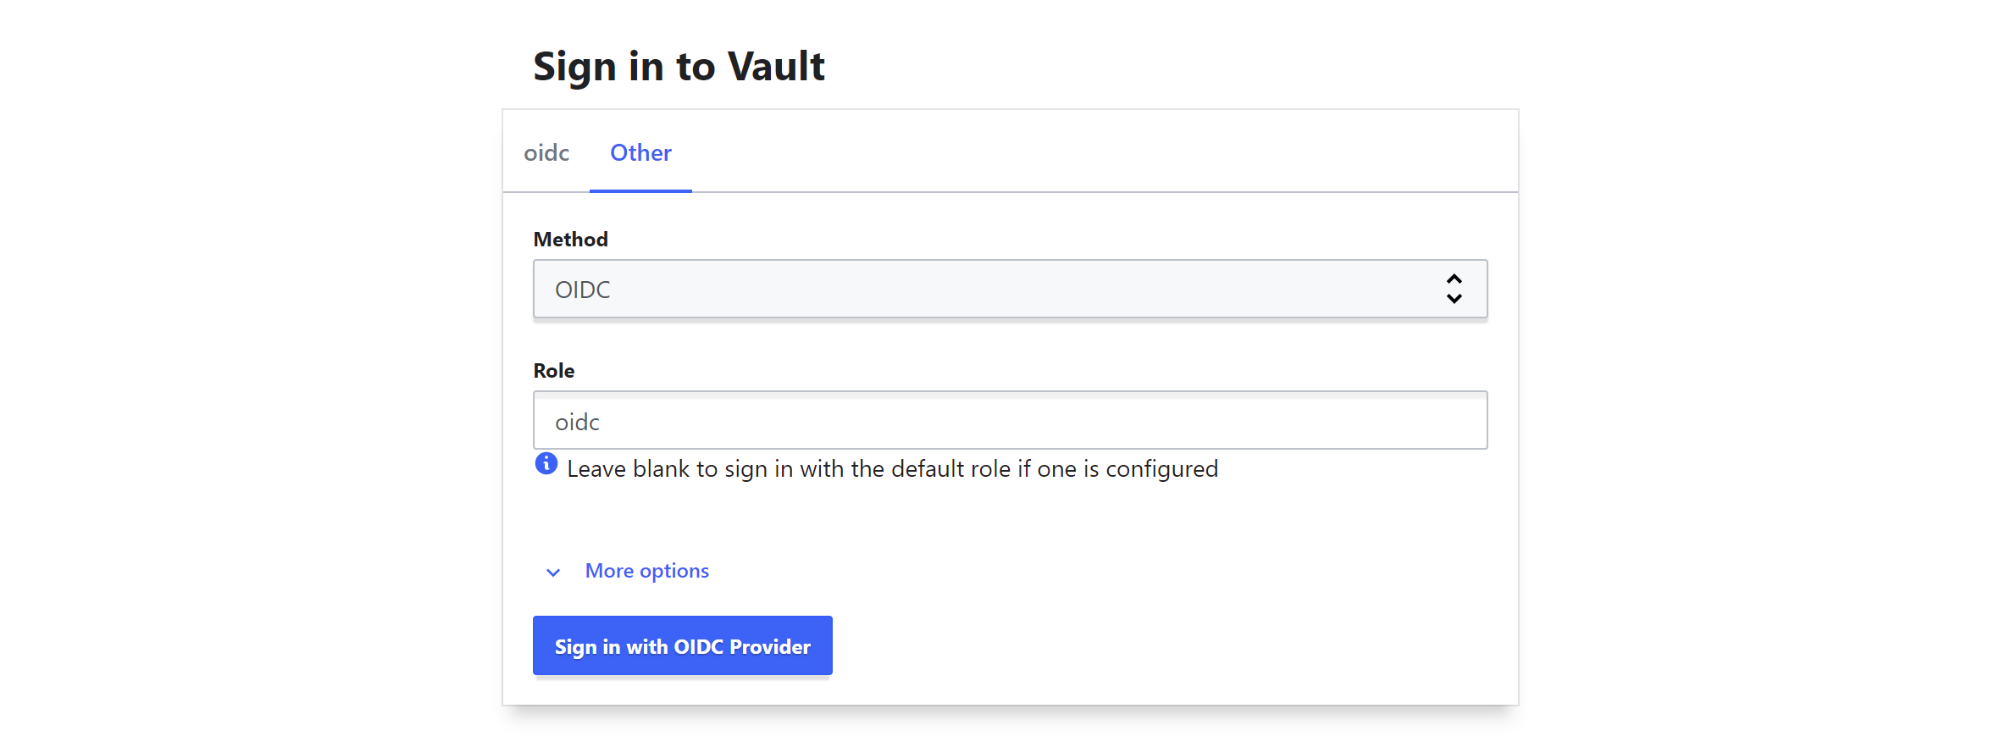 The login page to log in to the Vault web UI, with OIDC as the selected method.